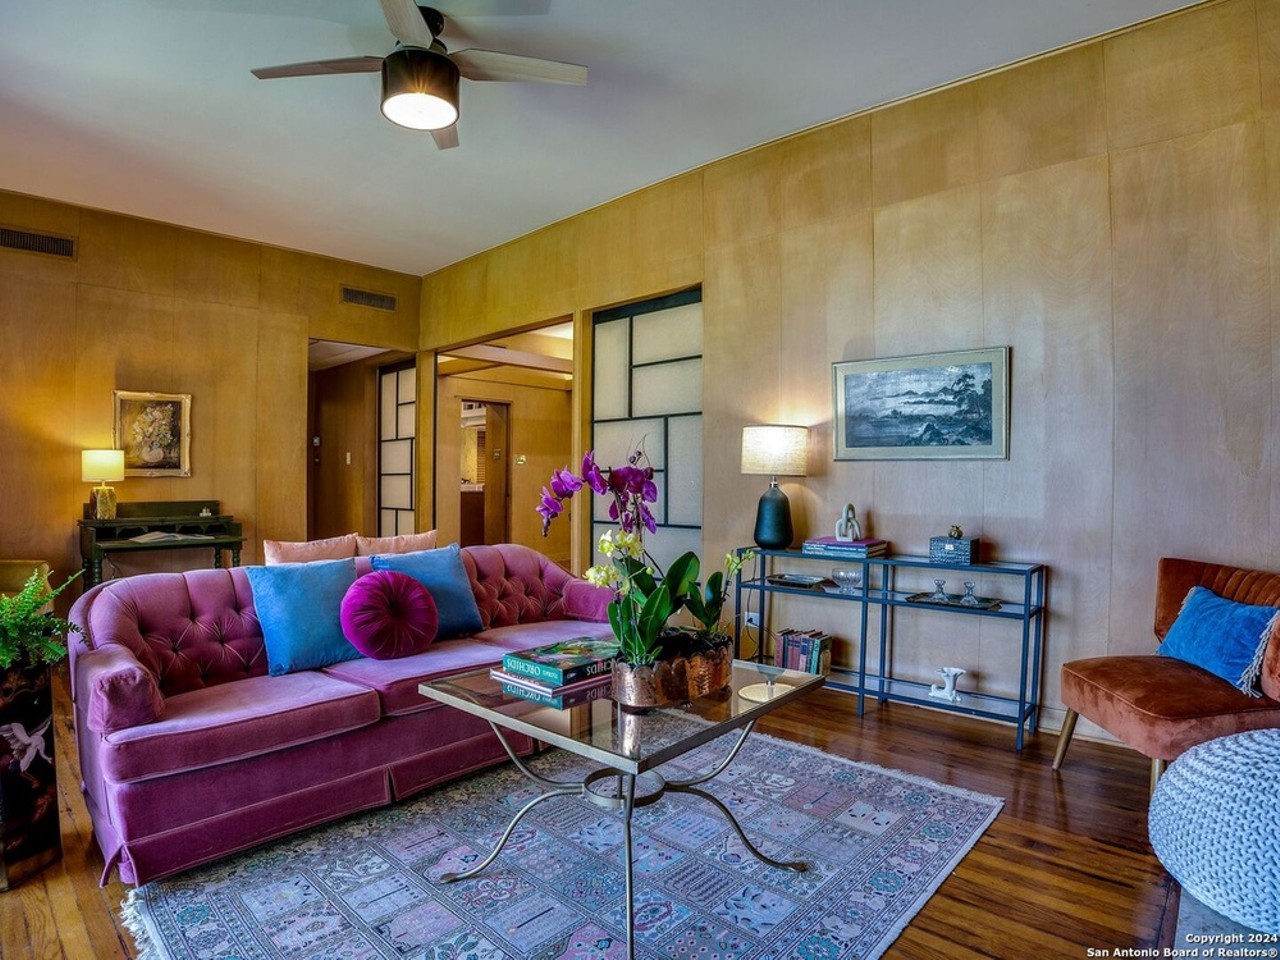 An Asian-inspired home owned by the family behind San Antonio's Dailey Liquors is for sale